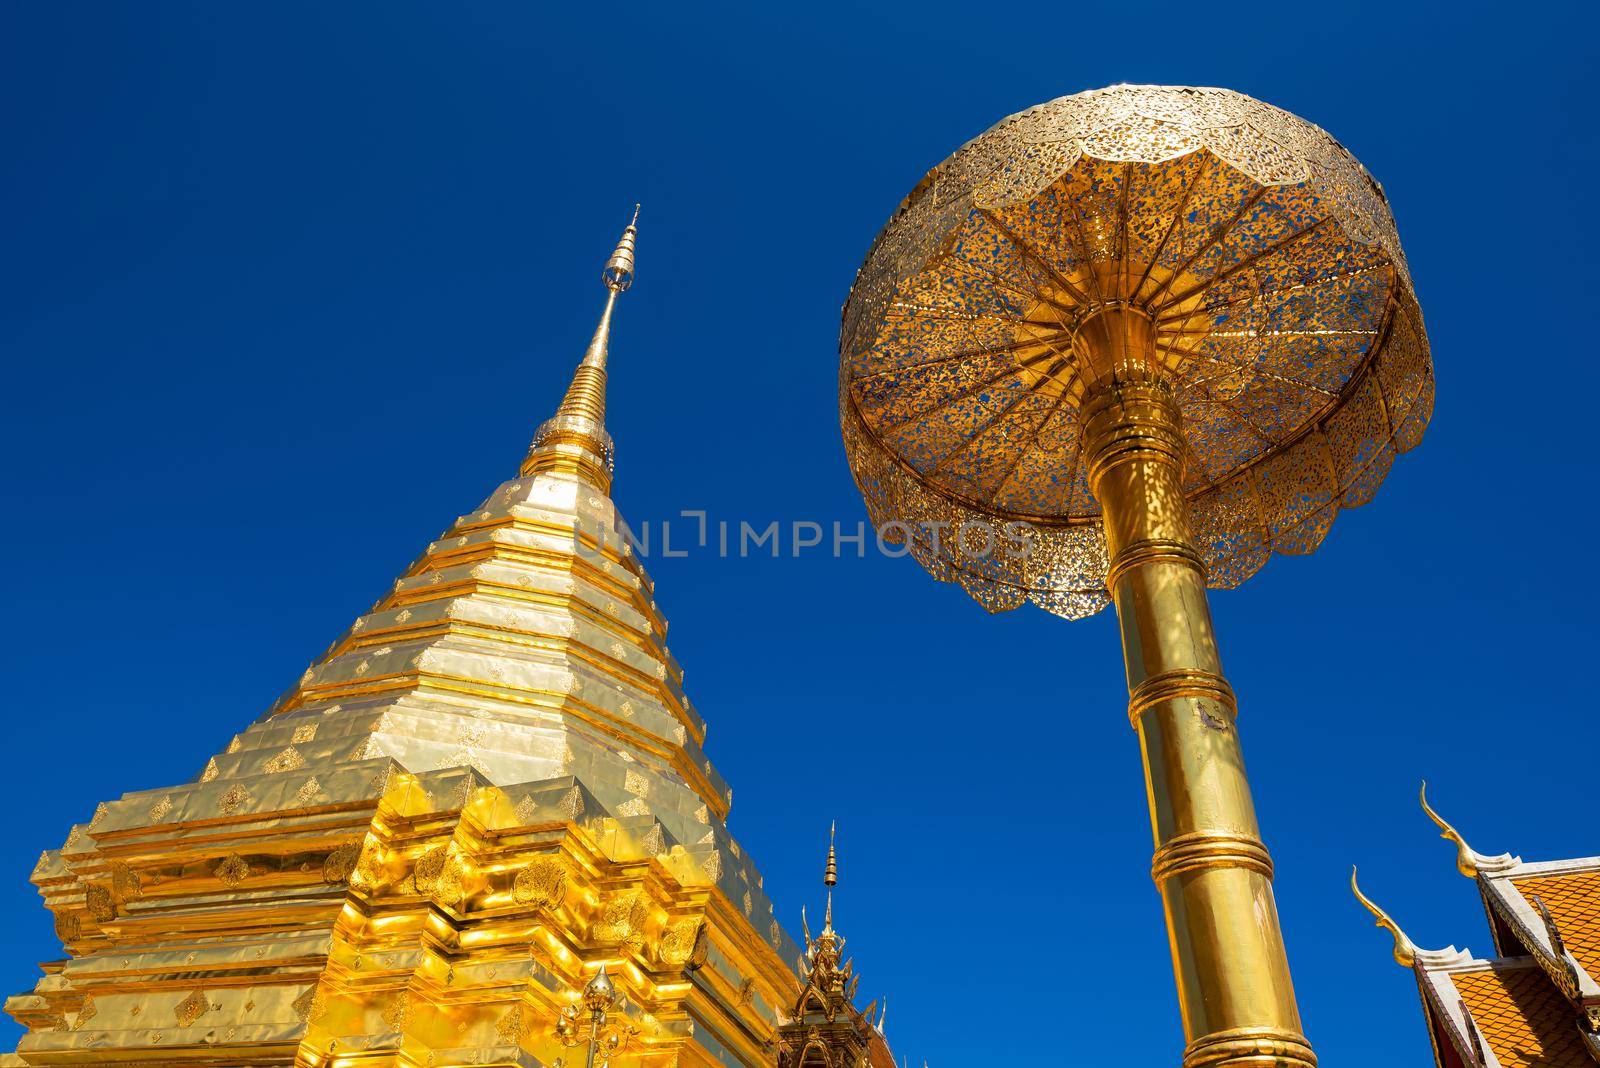 Wat Phra That Doi Suthep with blue sky in Chiang Mai. The attractive sightseeing place for tourists and landmark of Chiang Mai,Thailand by Nuamfolio